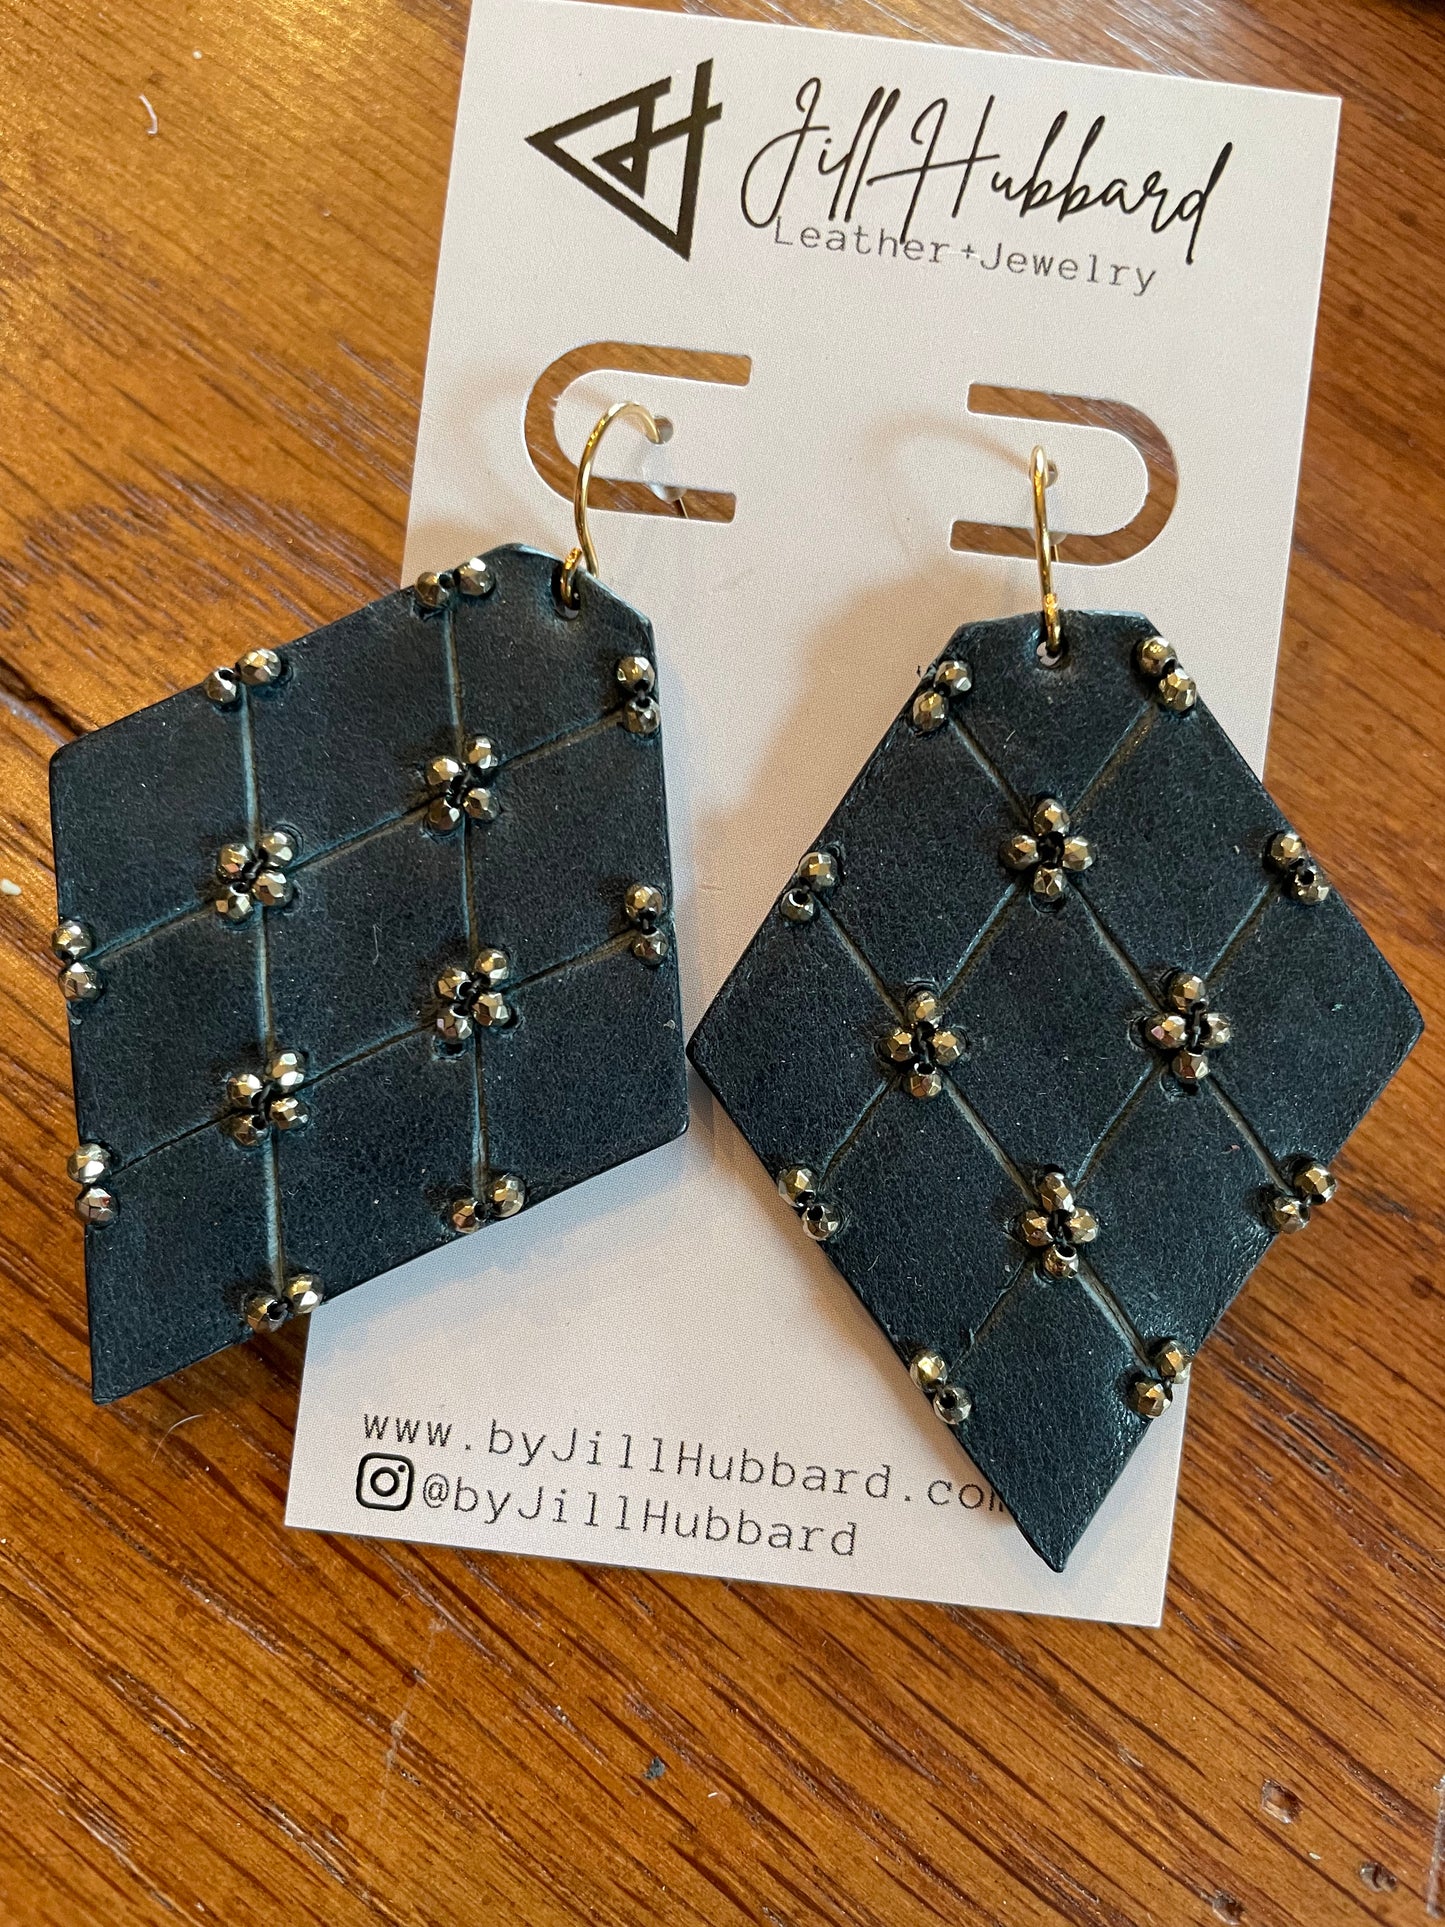 Medium QUILTED leather earrings